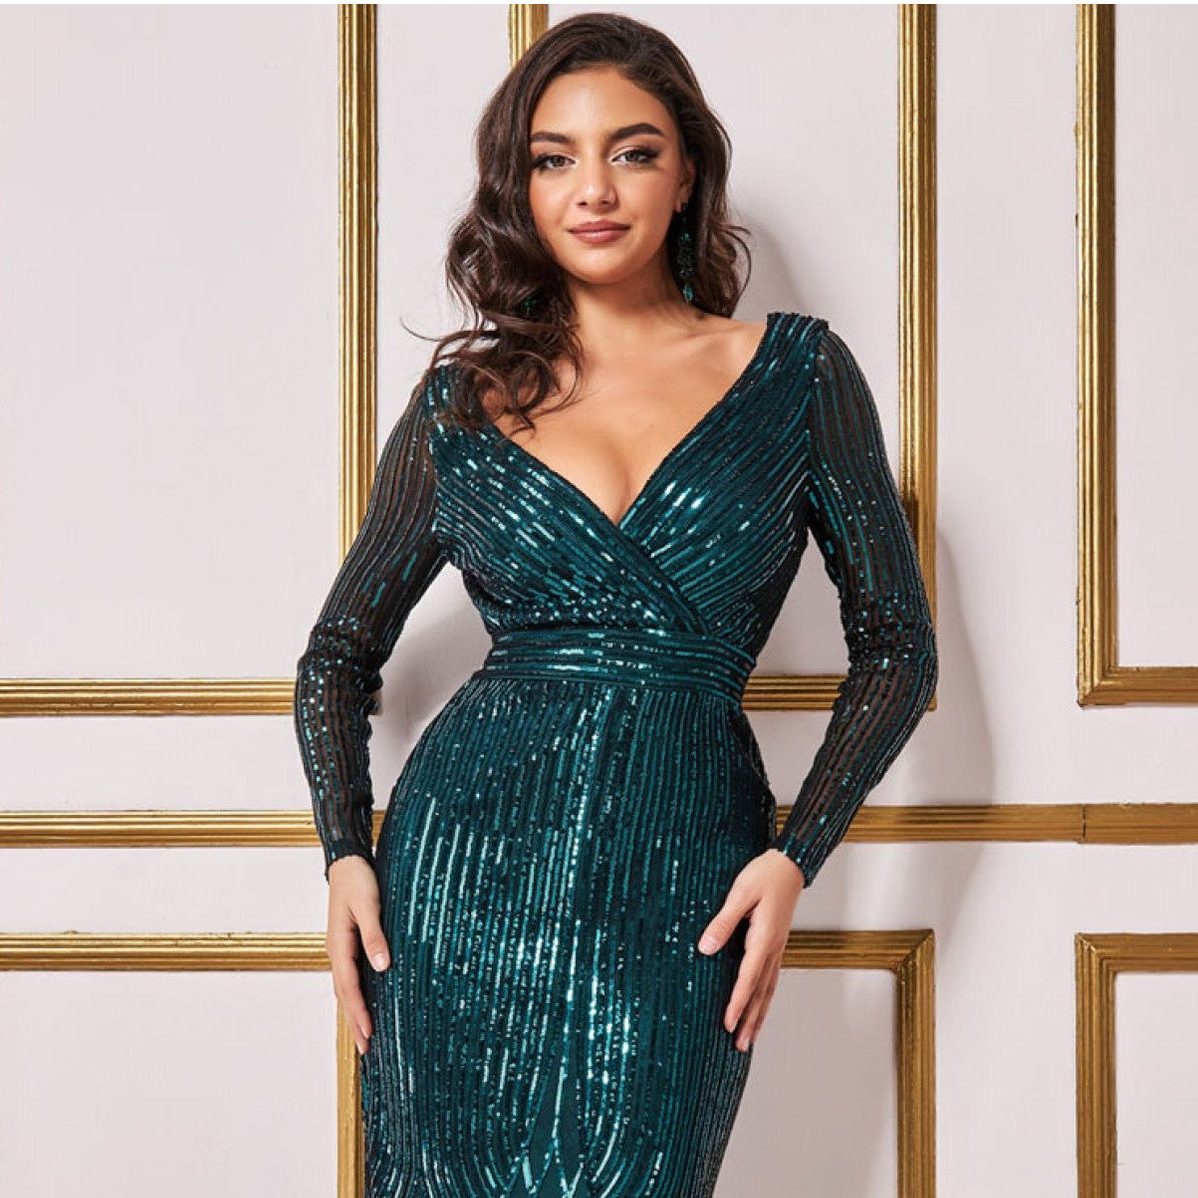 Sequins can be worn for any occasion! Take your sequin dress beyond the  holiday season with these tips on How to… | Sequin dress outfit, Sequin  outfit, Sequin dress